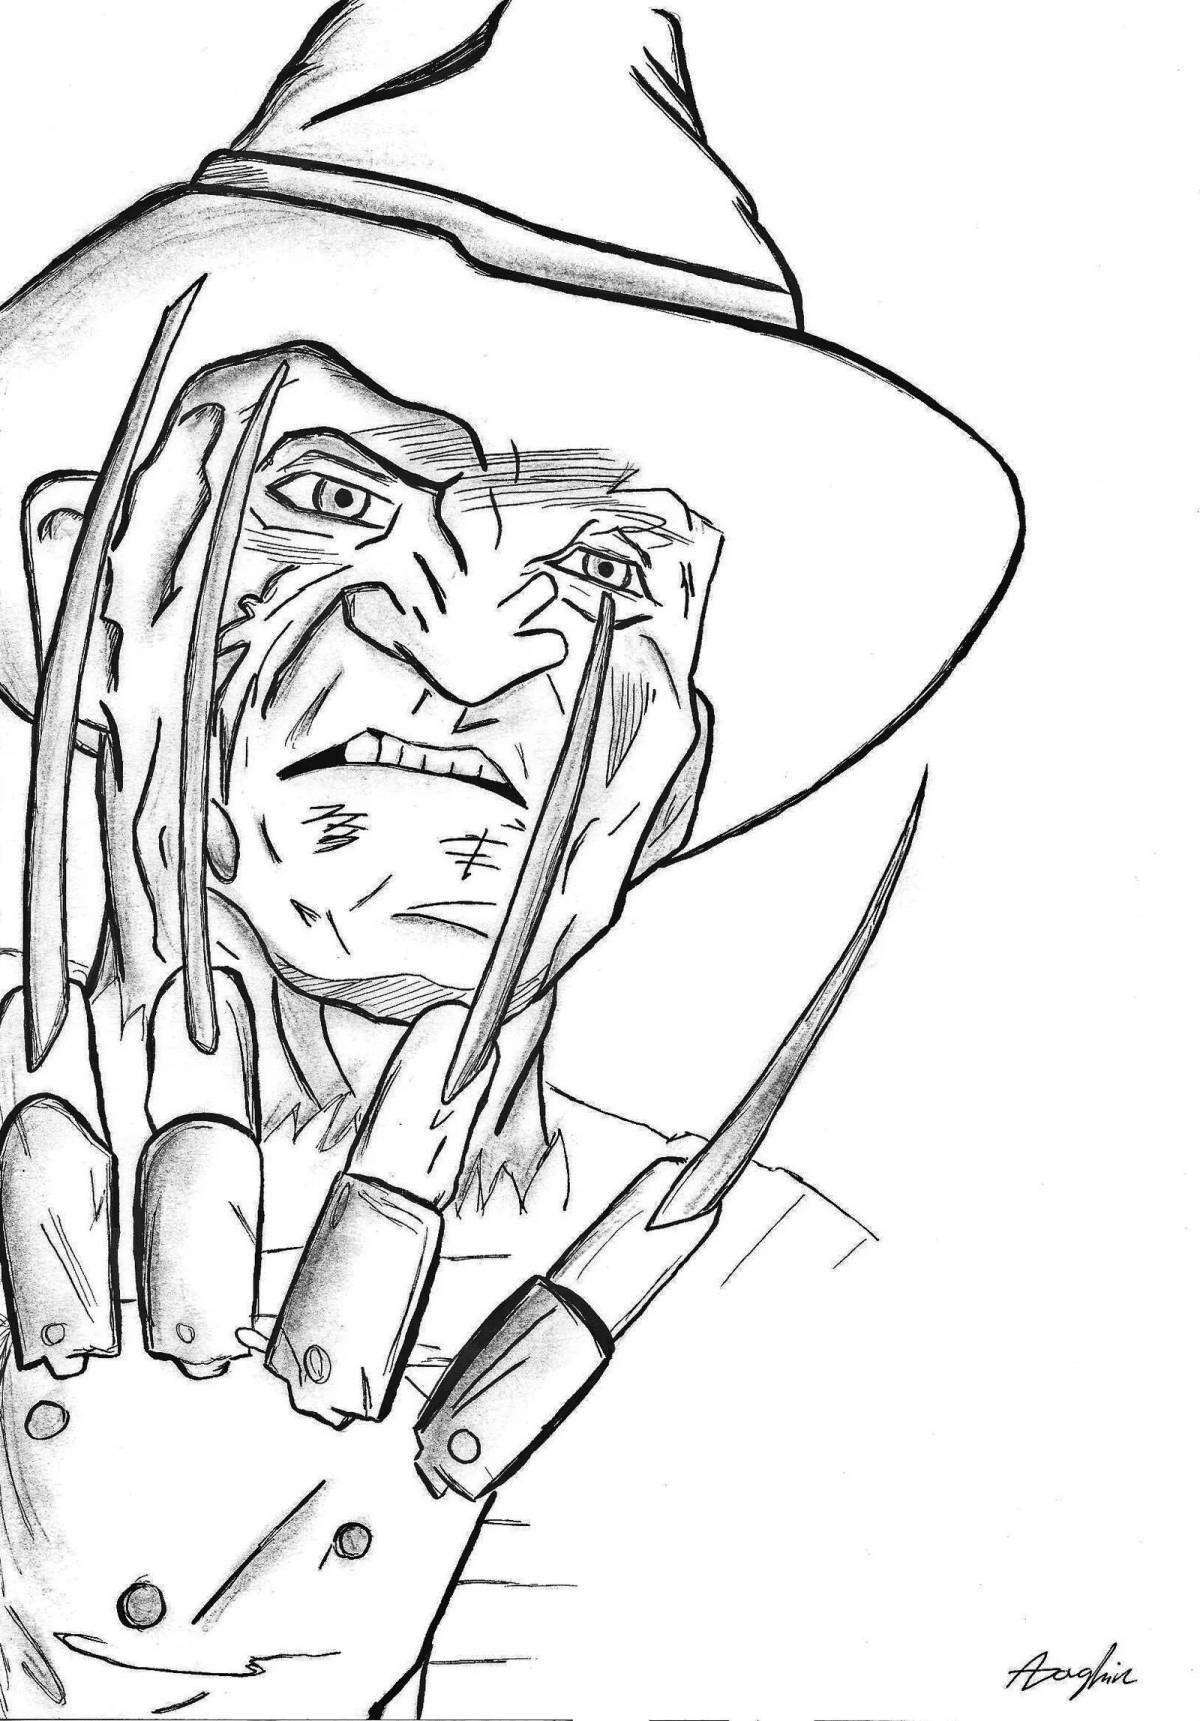 Angry Freddy Krueger Coloring Page